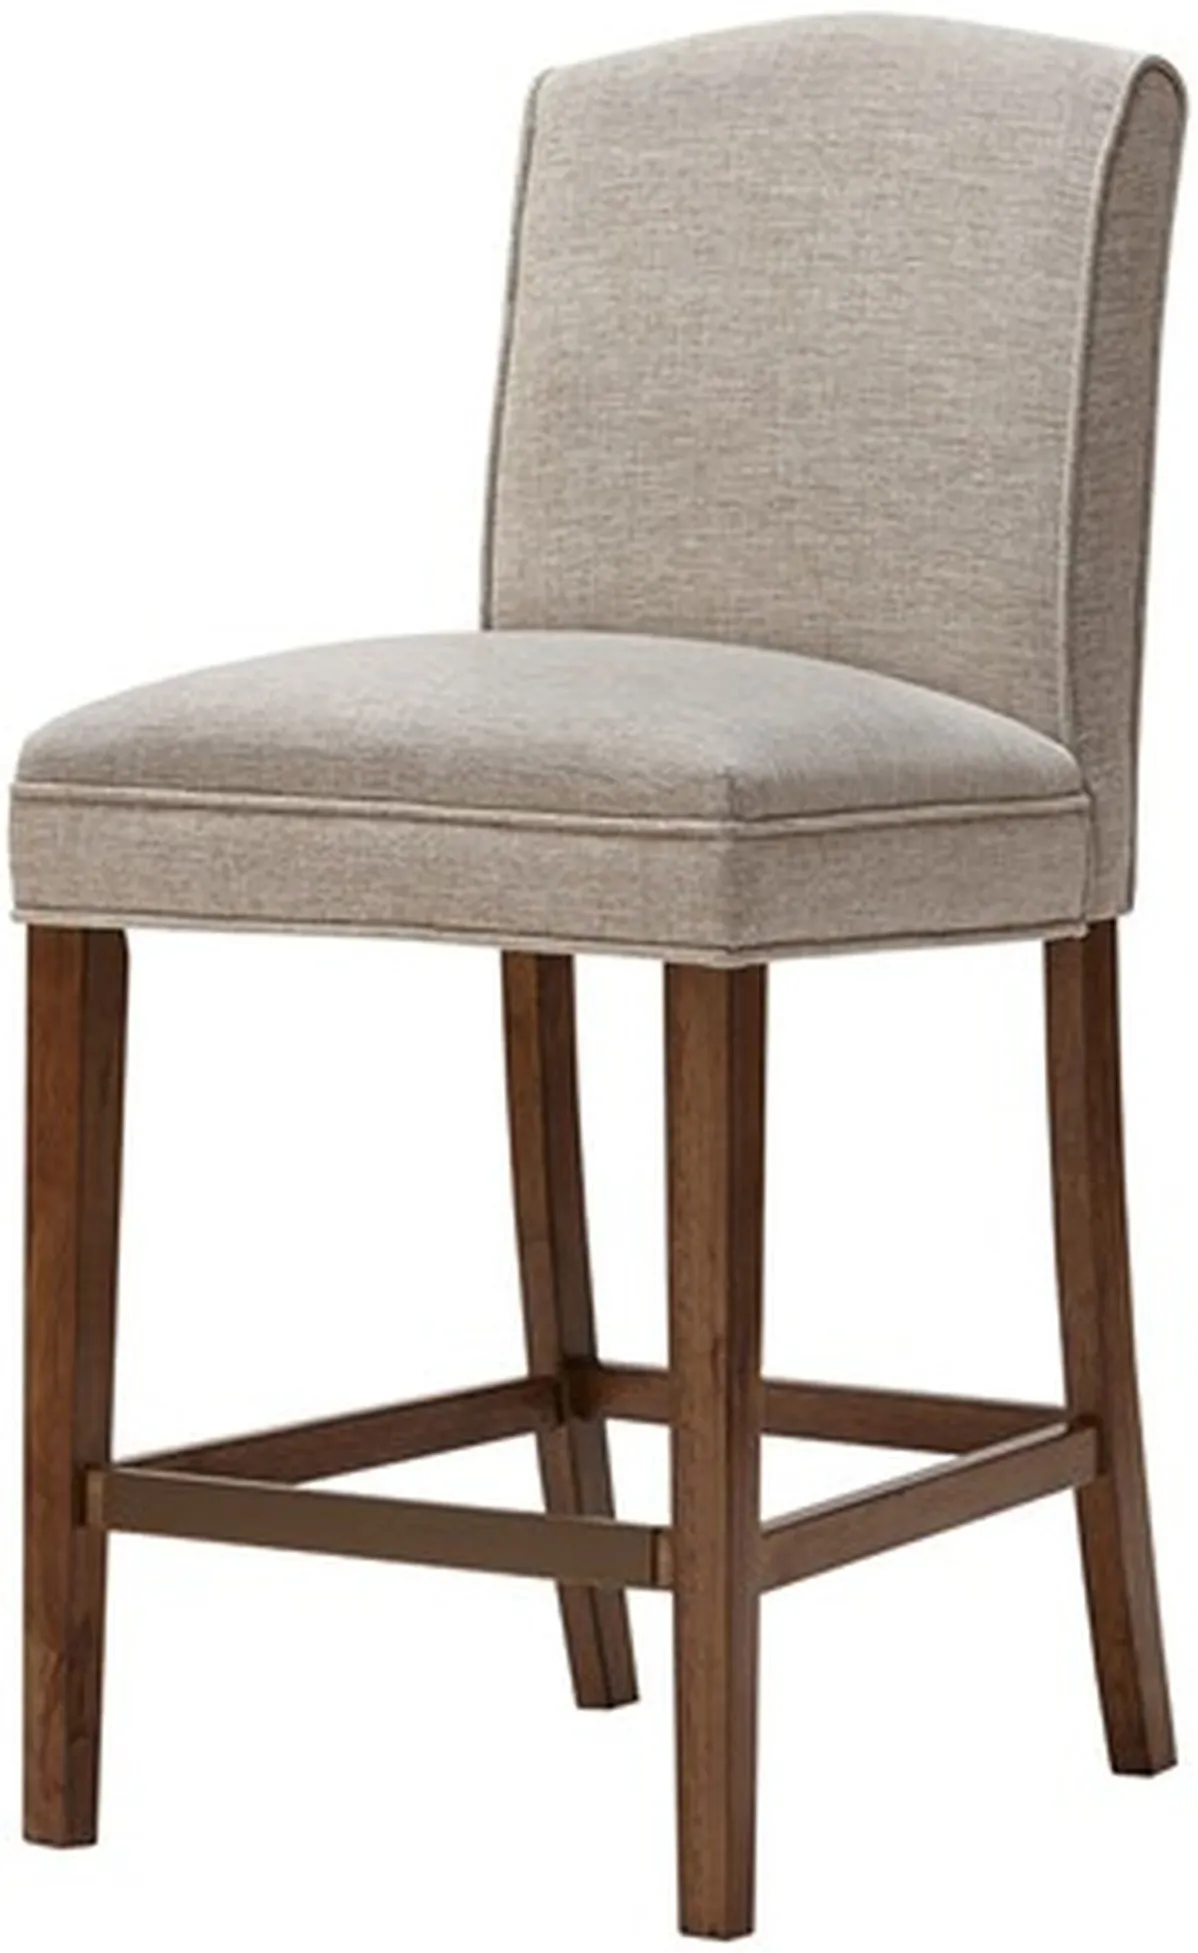 Olliix by Madison Park Cream Camel Counter Height Stool